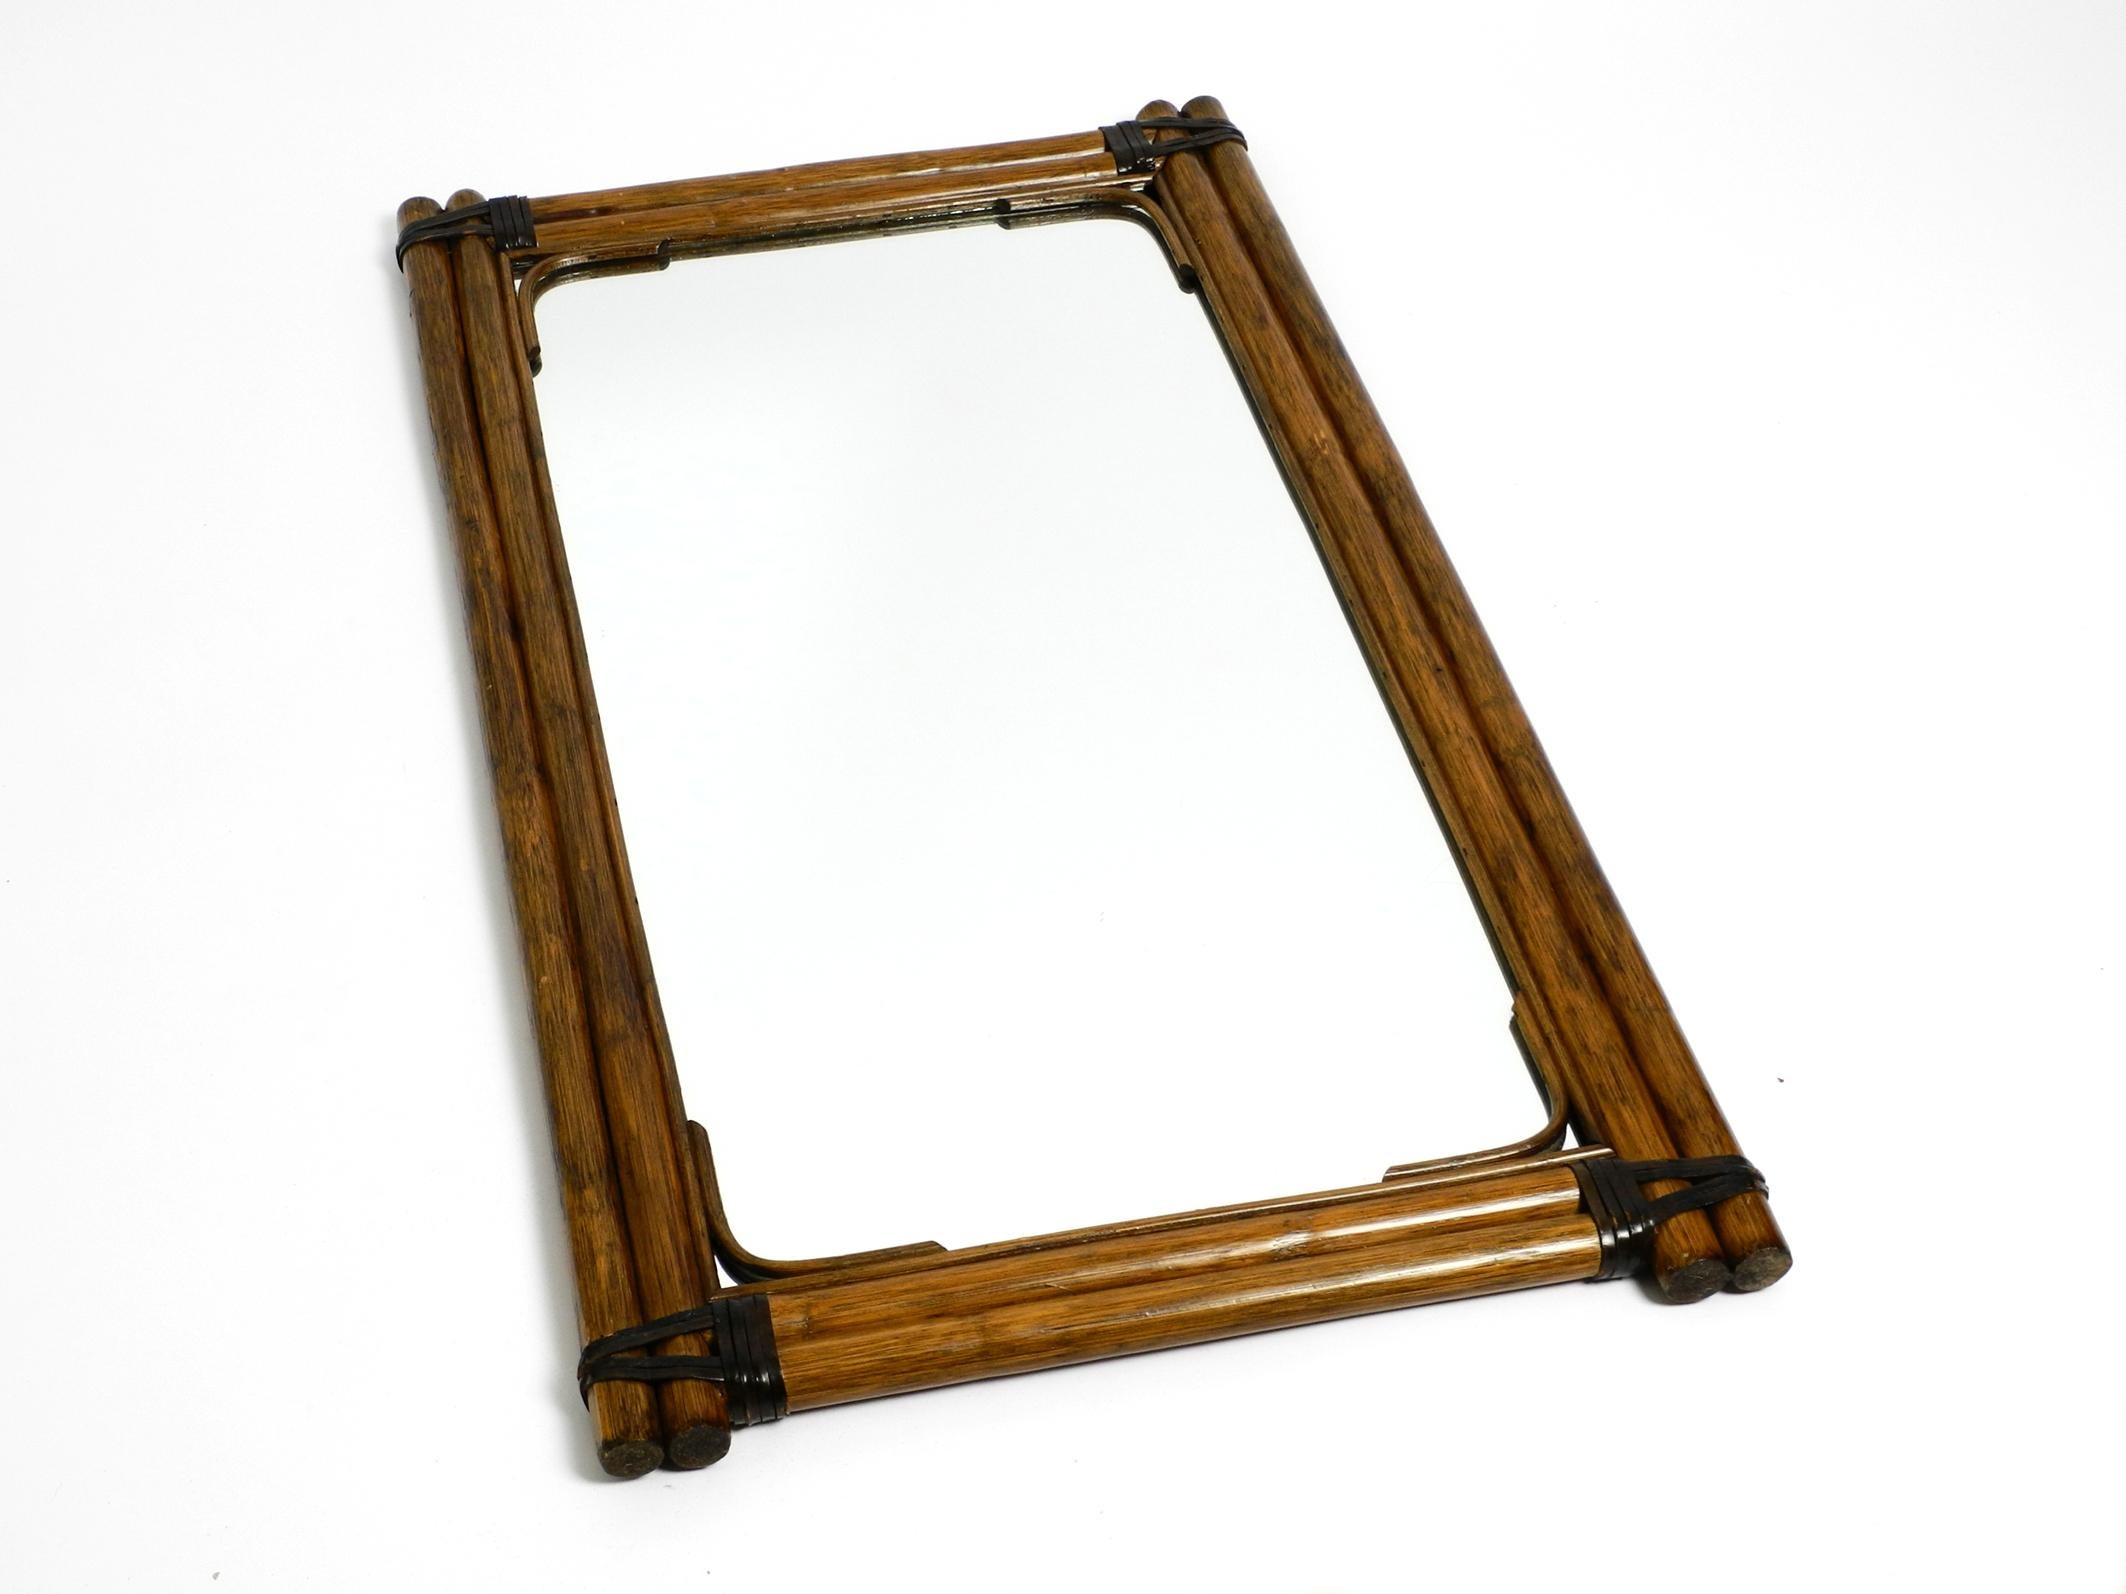 Beautiful large Mid Century Modern wall mirror made of dark bamboo wood.
Made in Italy. Great Italian minimalist design of the 1950's.
The wood is additionally fastened at the corners with leather straps.
Looks very nice with the old patinated